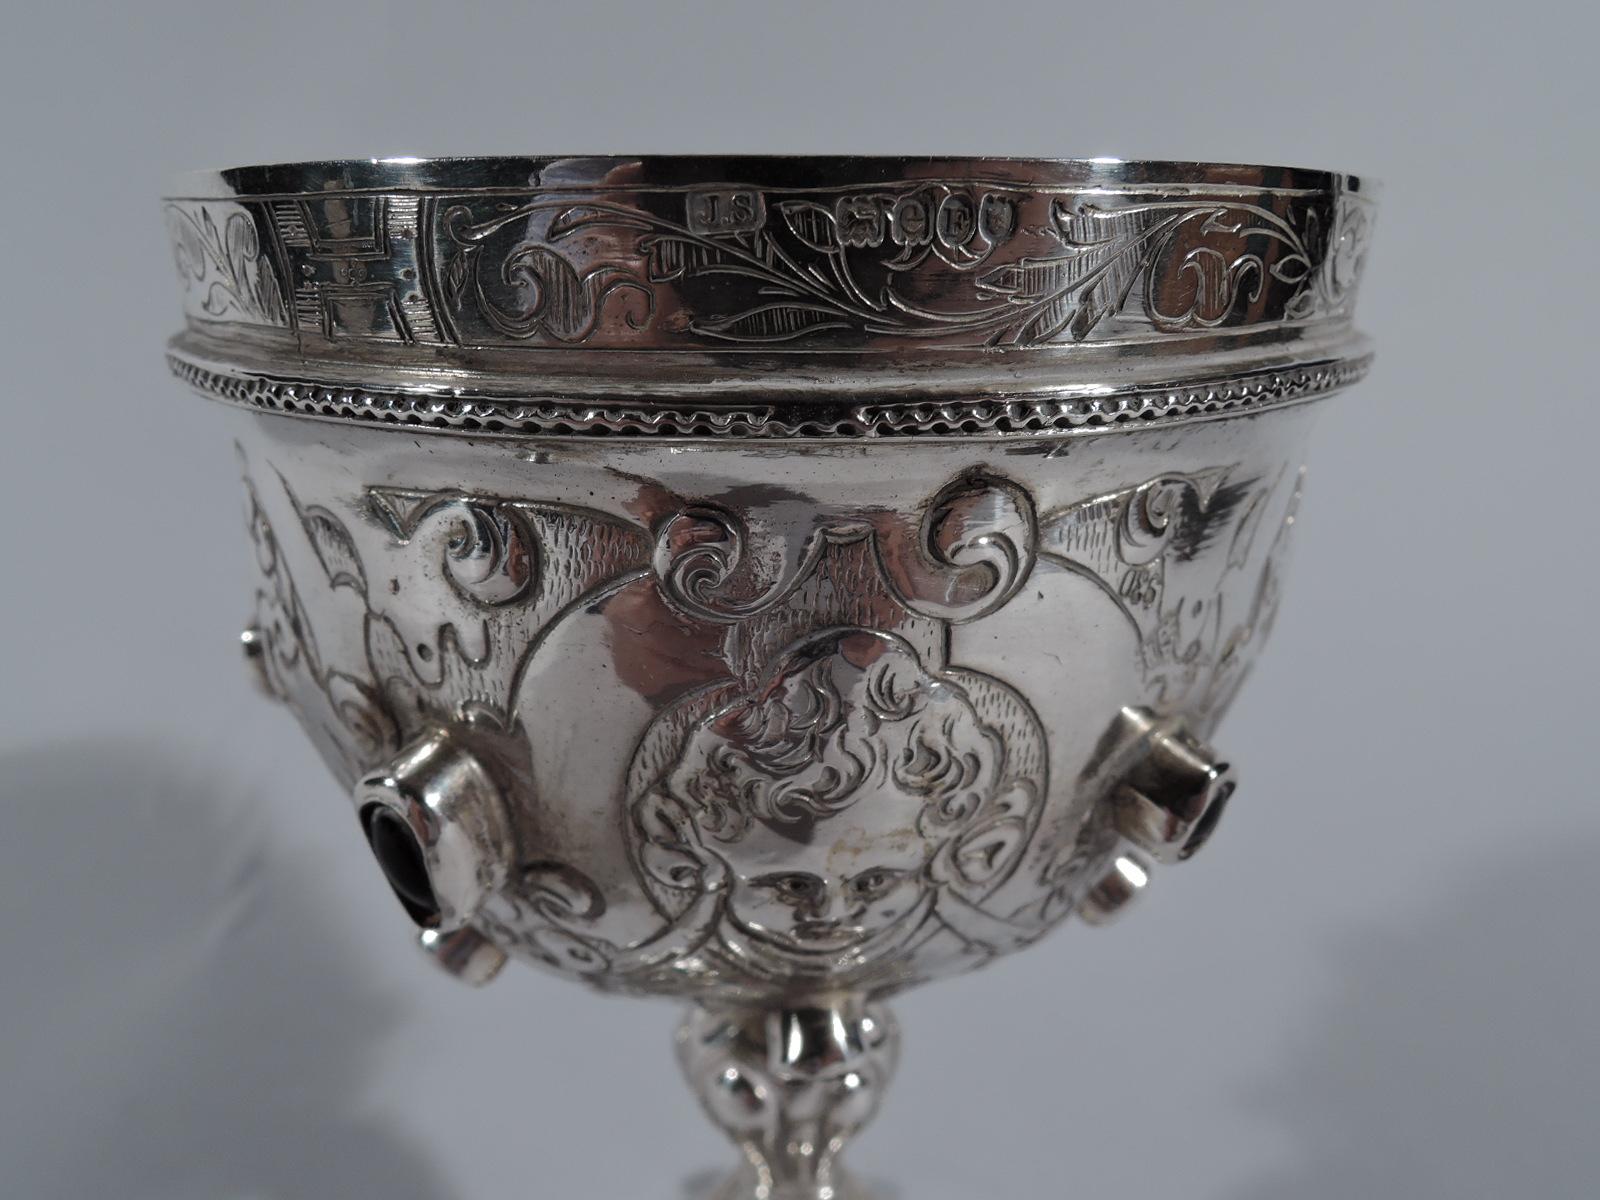 European Antique Sterling Silver Jeweled Goblet with English Import Marks